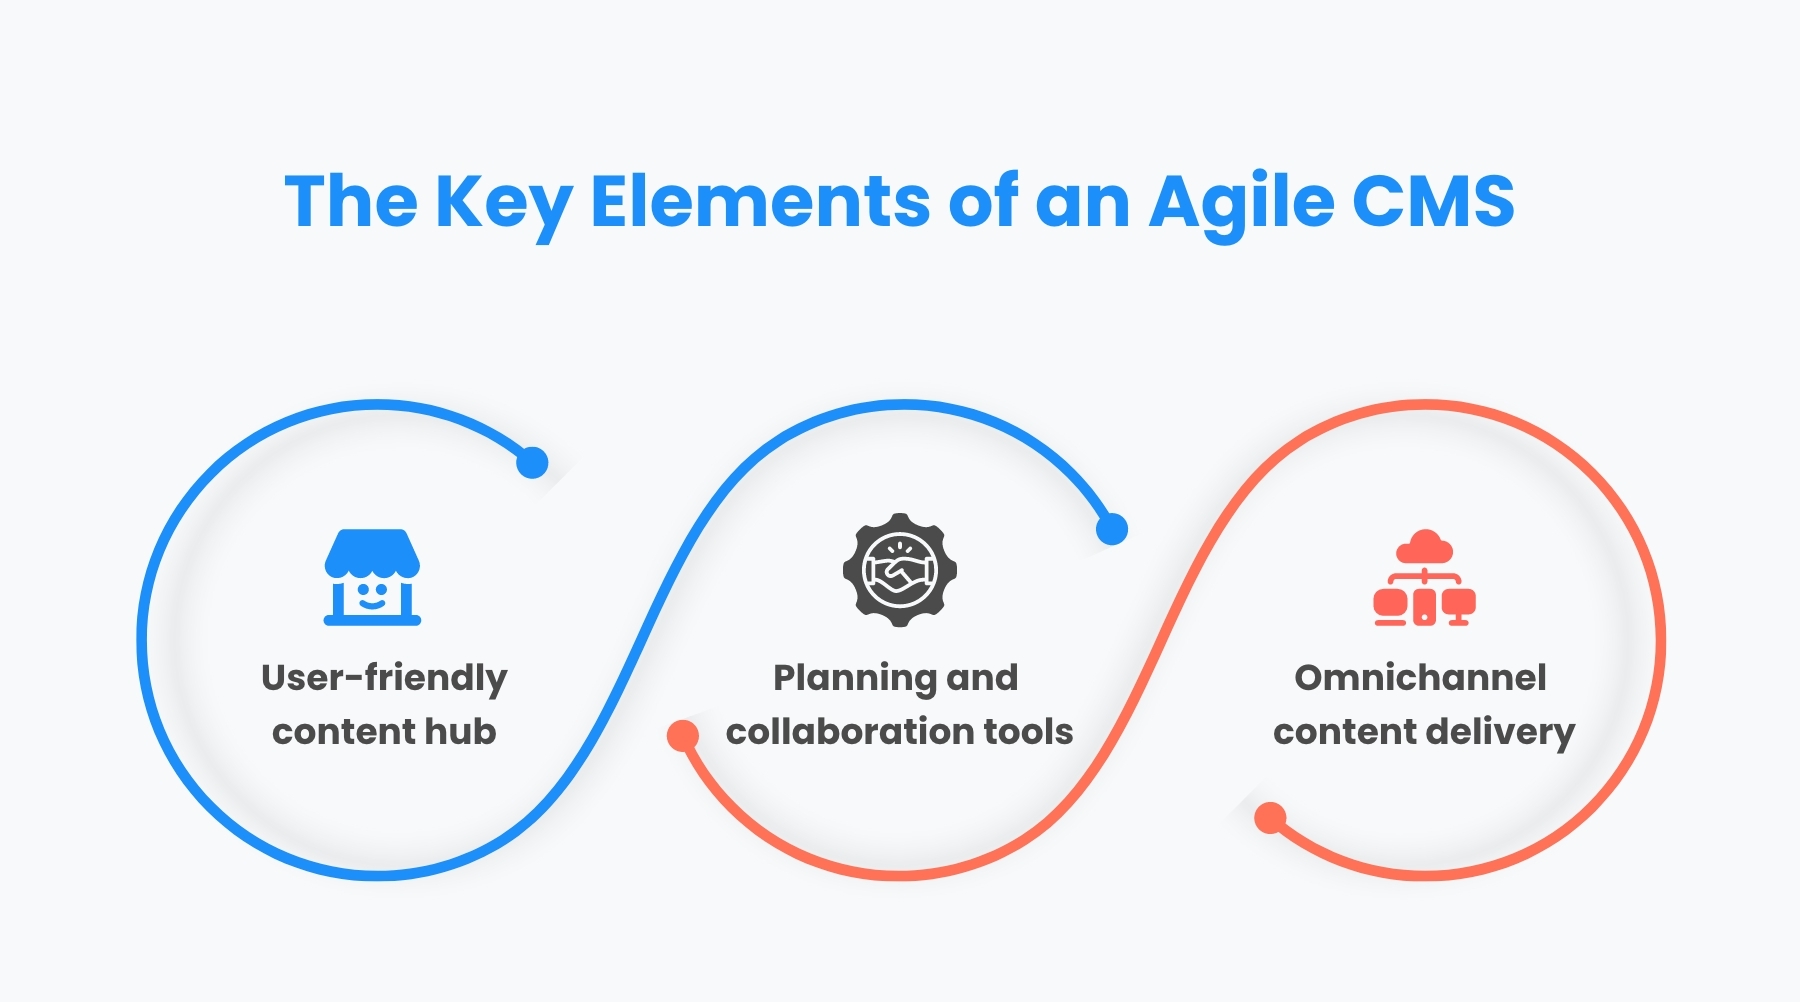 The Key Elements of an Agile CMS